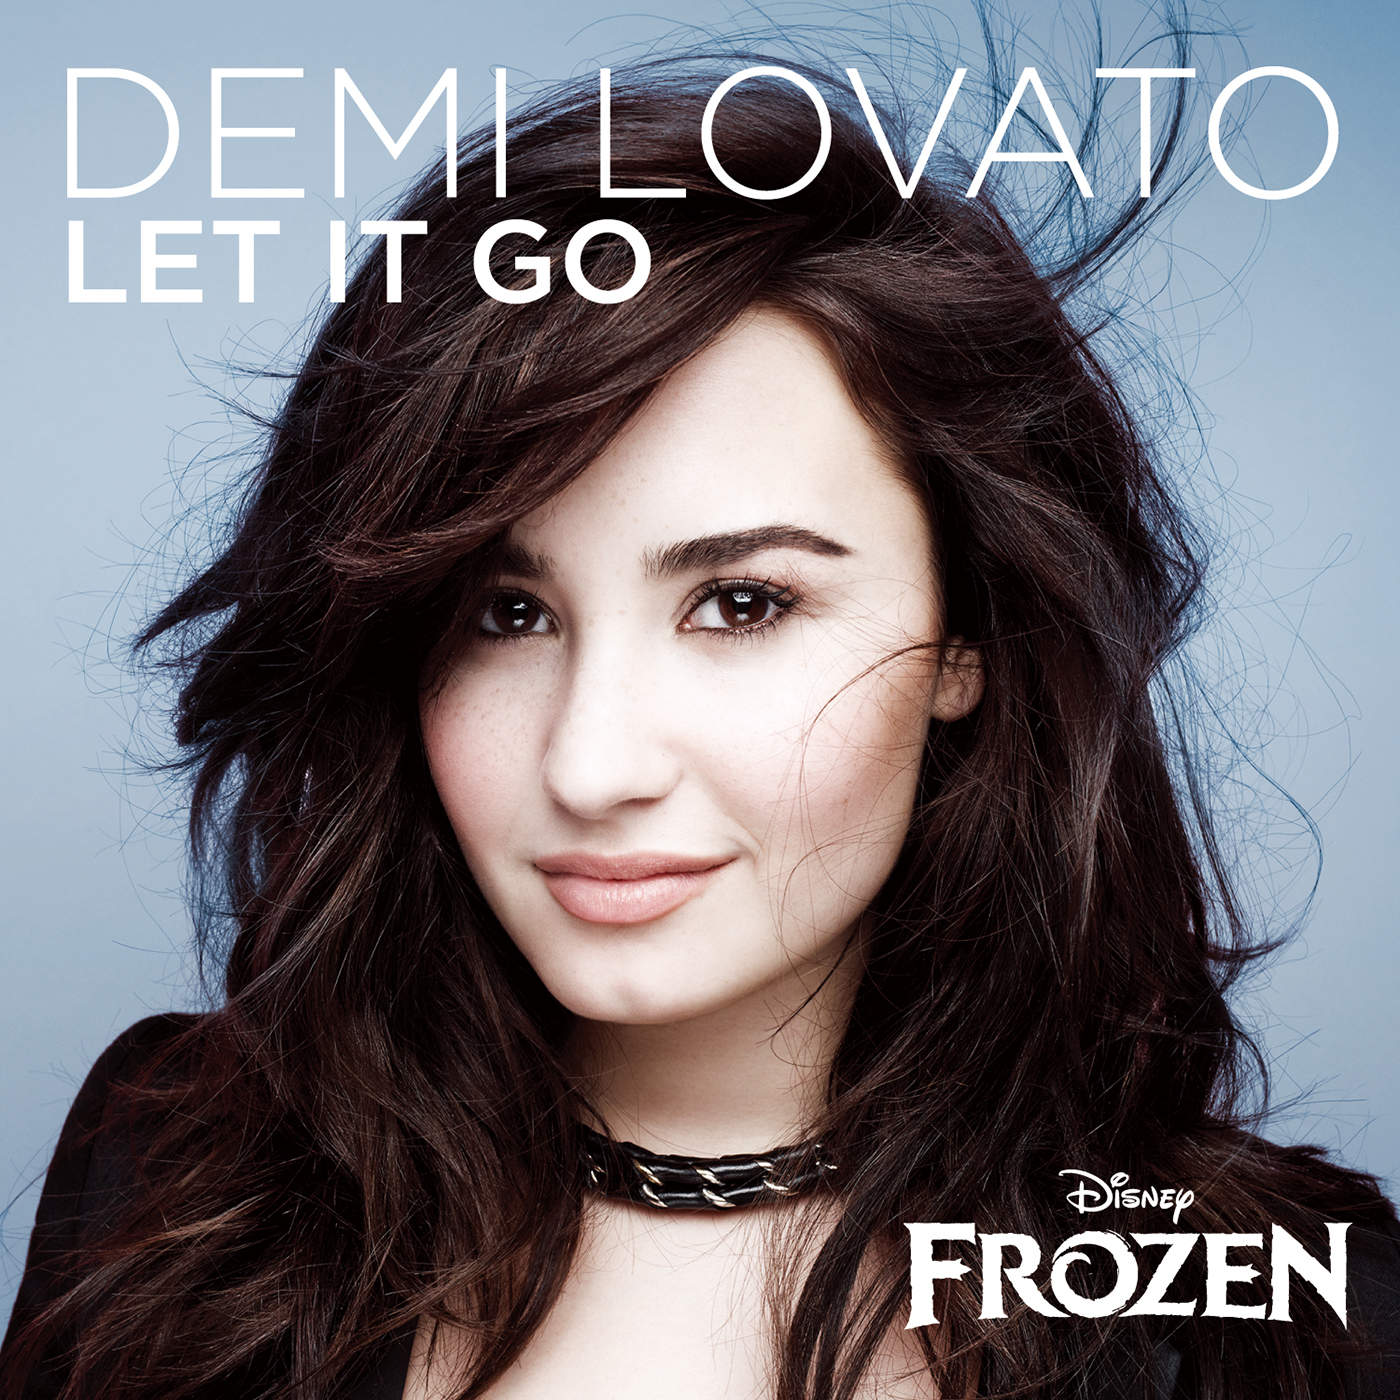 let her go cover